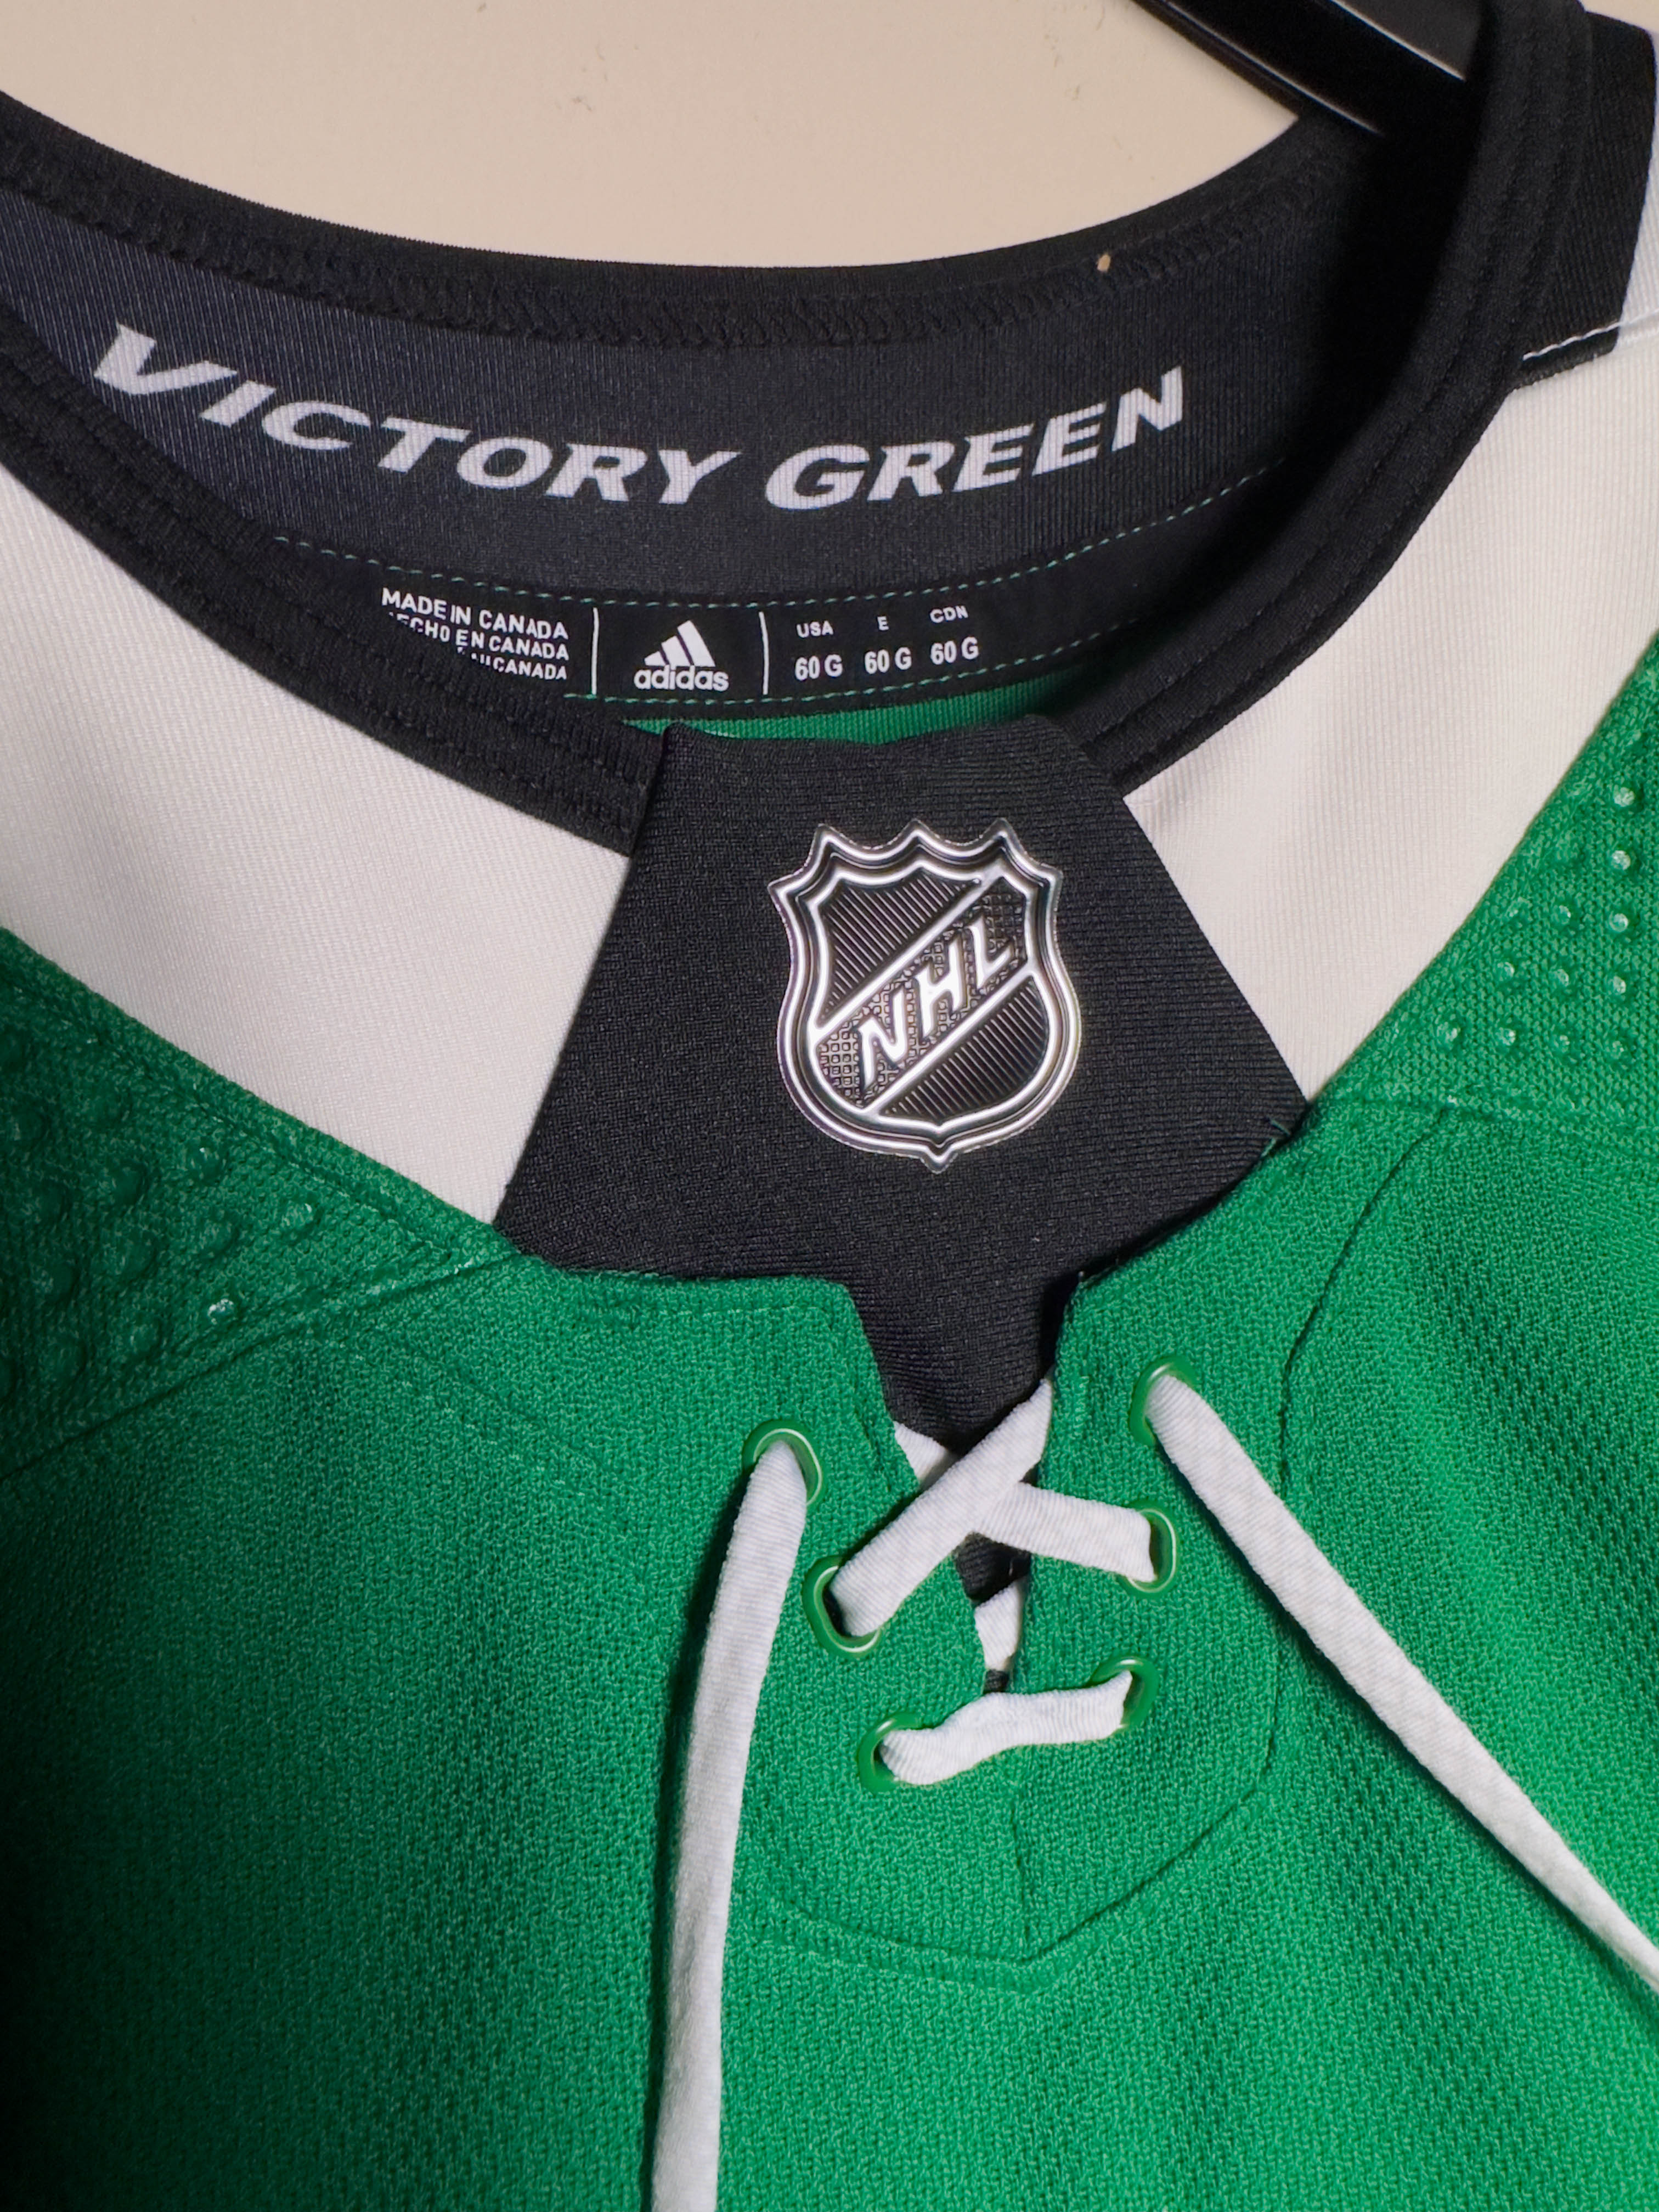 Dallas Stars NHL Adidas MiC Team Issued Home Jersey Size 60G (Goalie Cut)